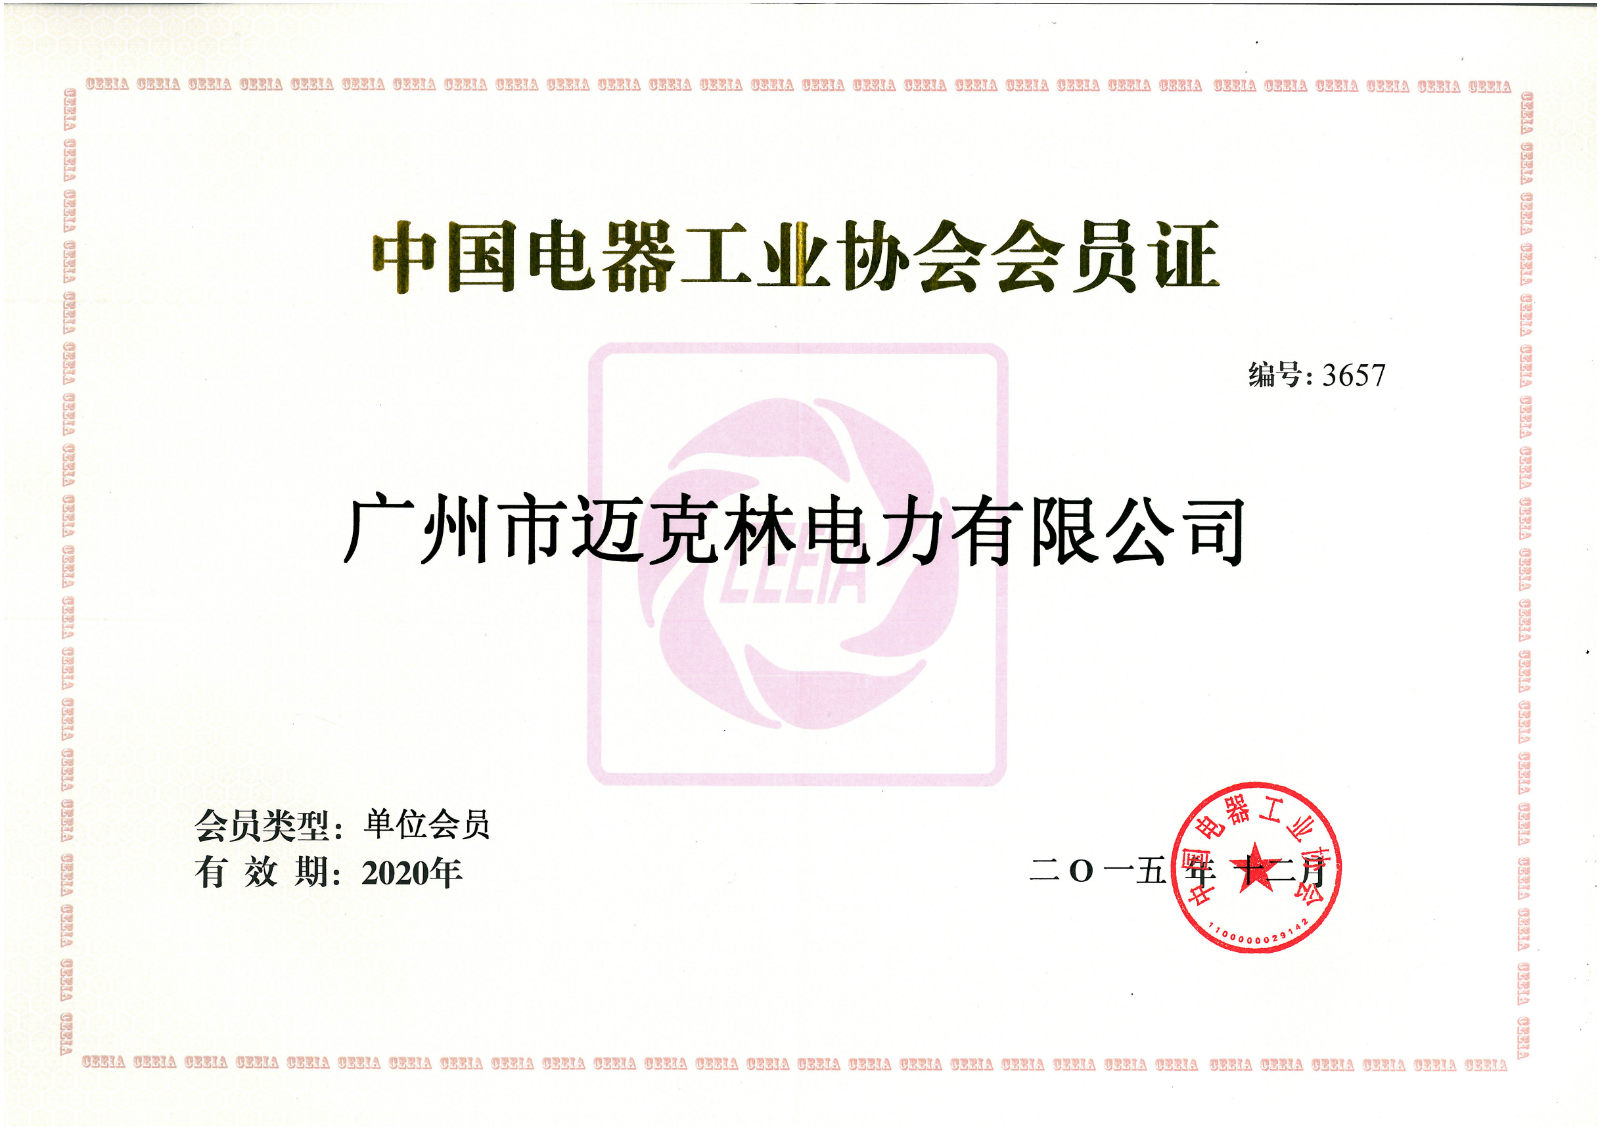 Membership card of China Electrical Equipment Industry Association